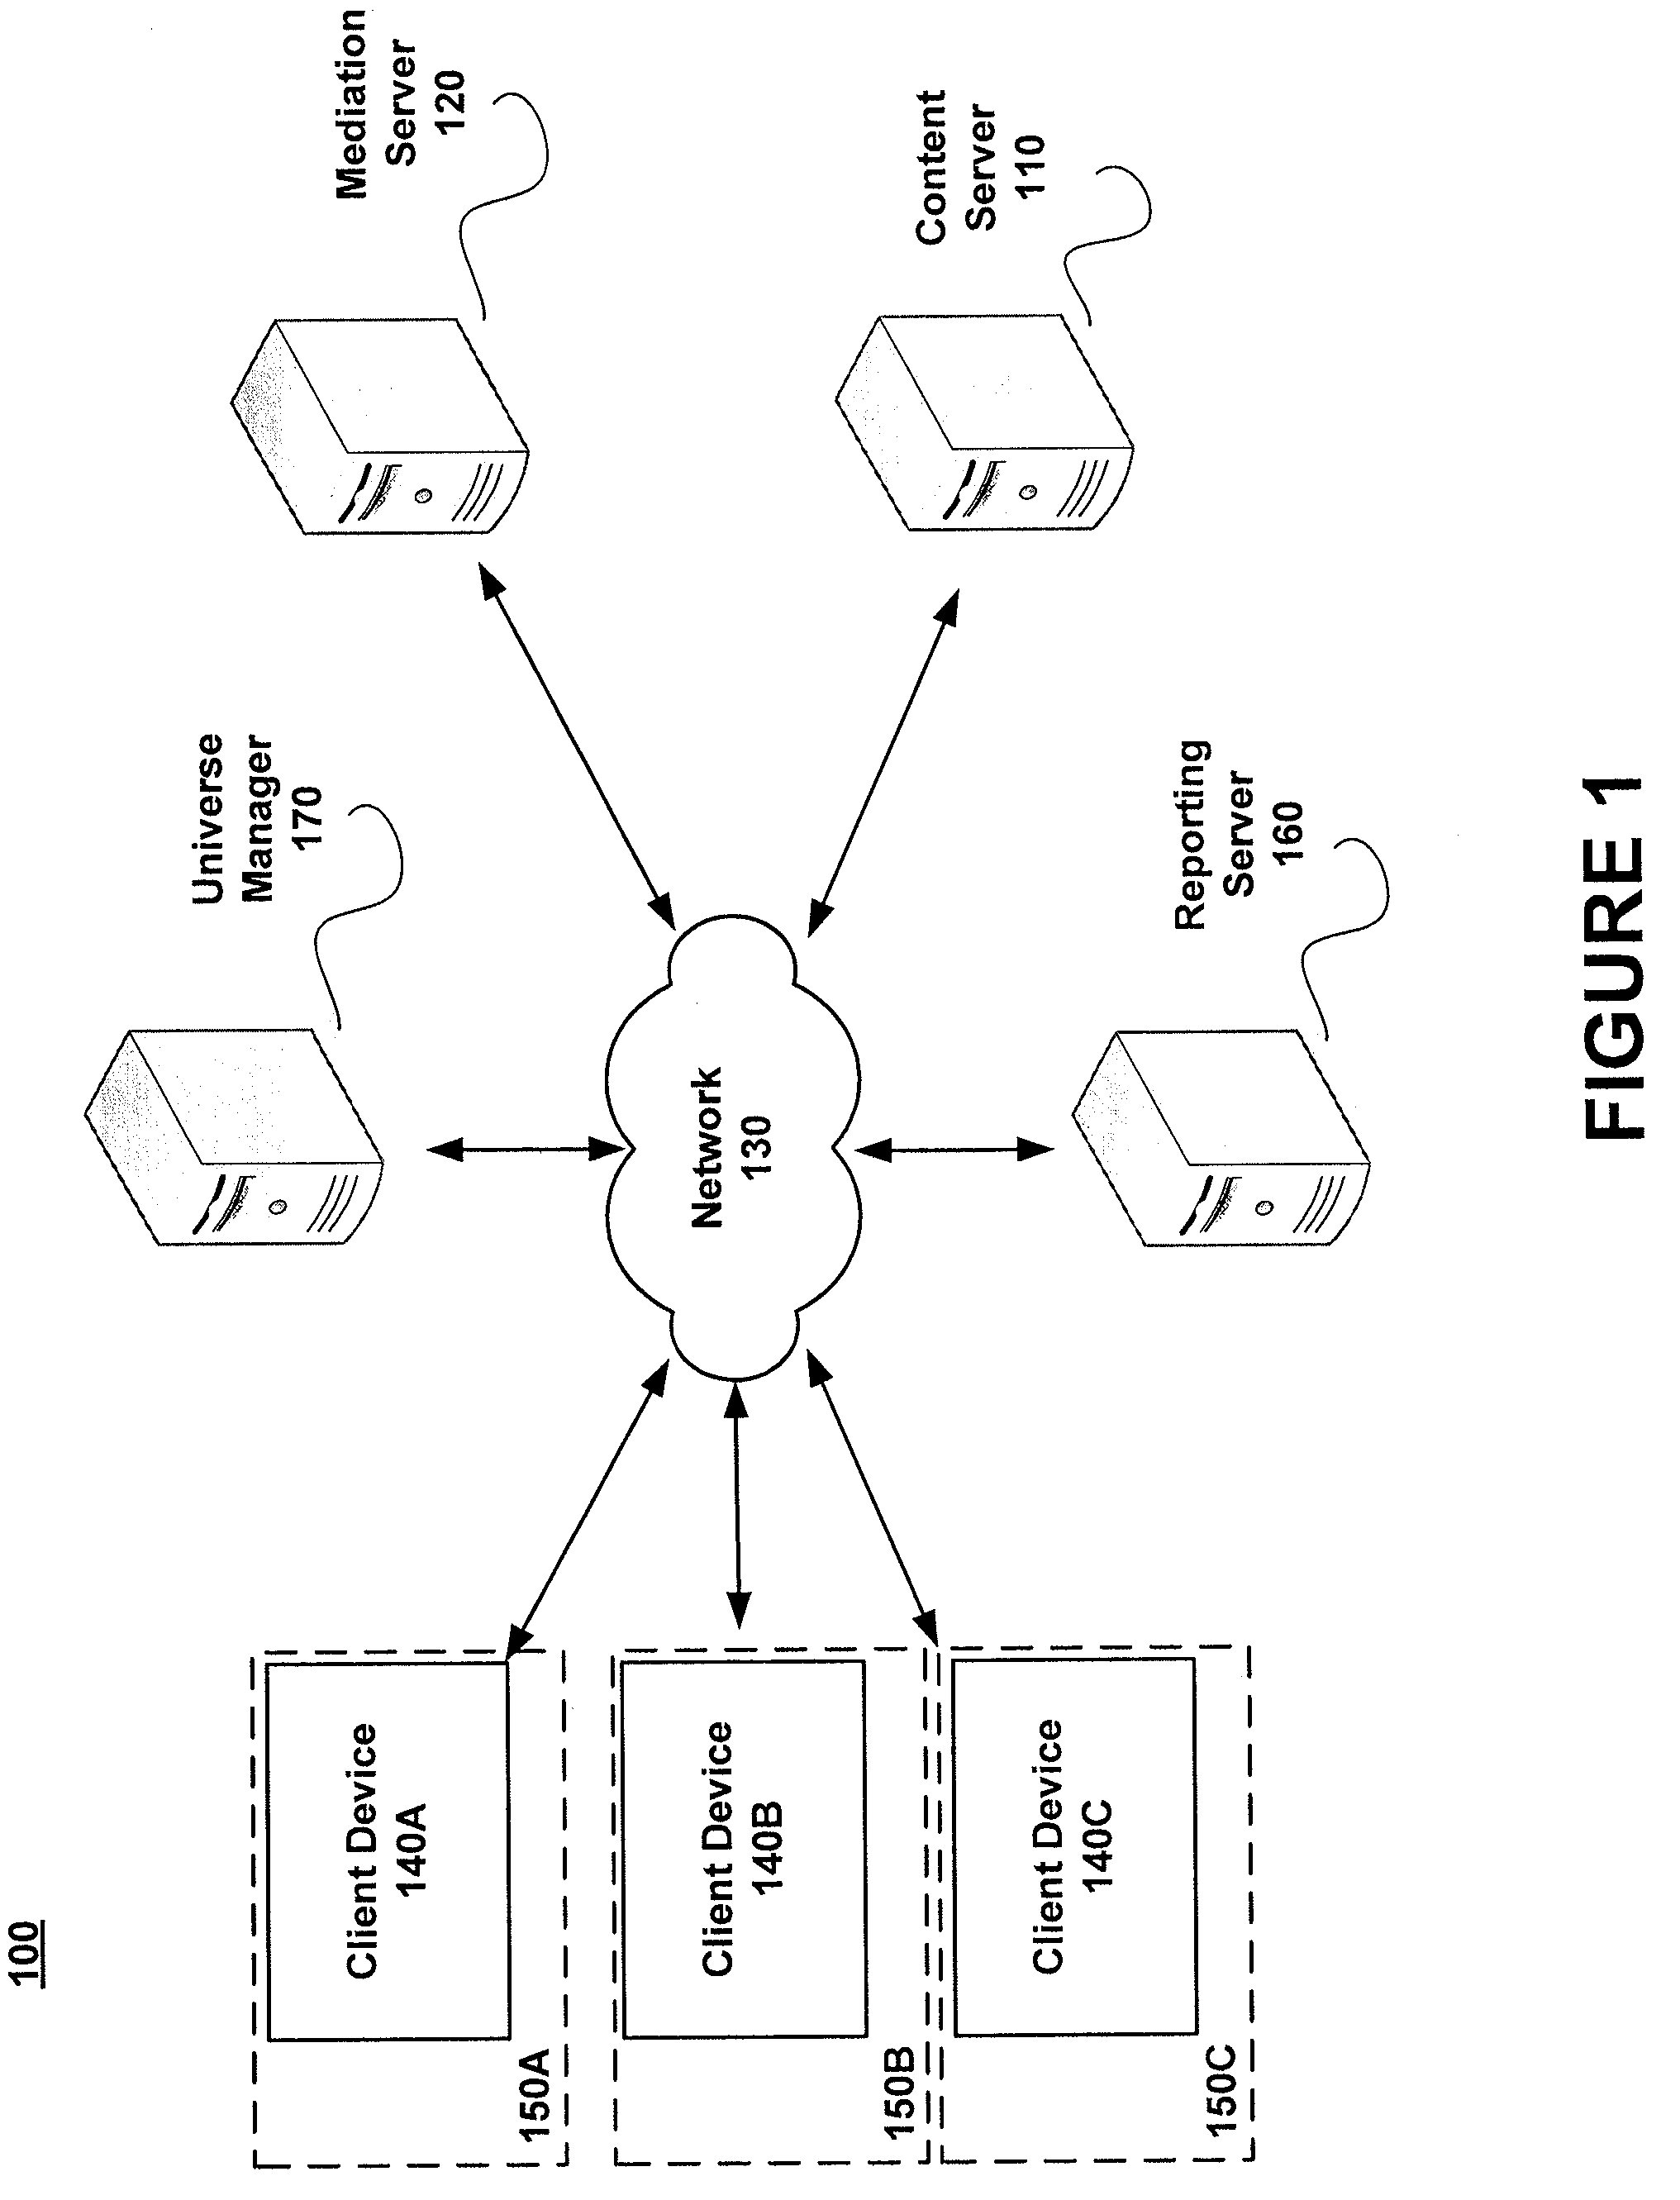 Management of ancillary content delivery and presentation